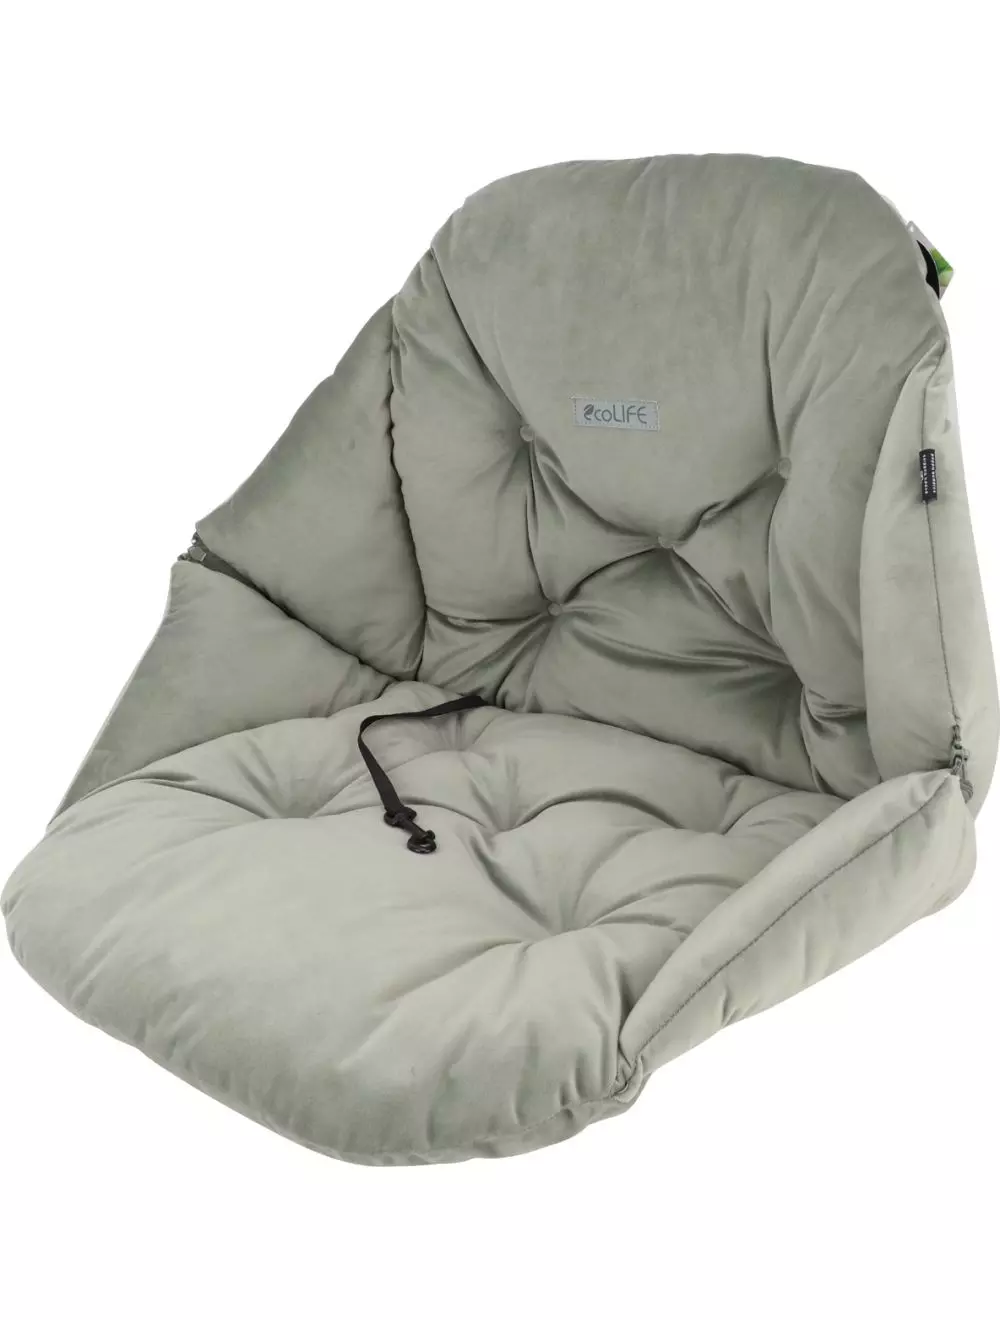 Peppy Buddies Car Seat Bed Green